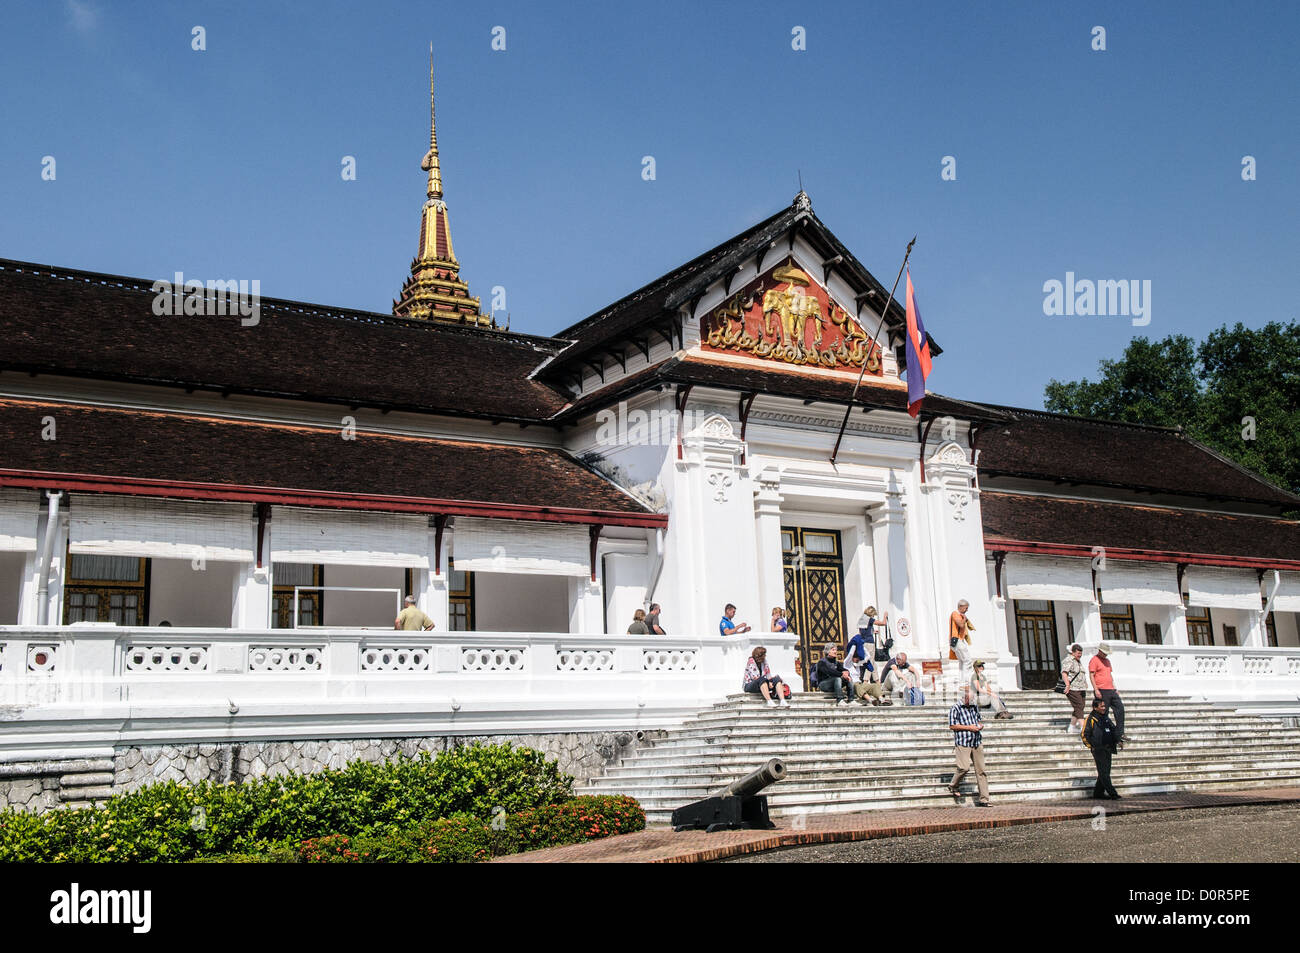 LUANG PRABANG, Laos - Tourists milling on the stairs of the main palace building in the Royal Palace Museum of Luang Prabang, Laos. Stock Photo